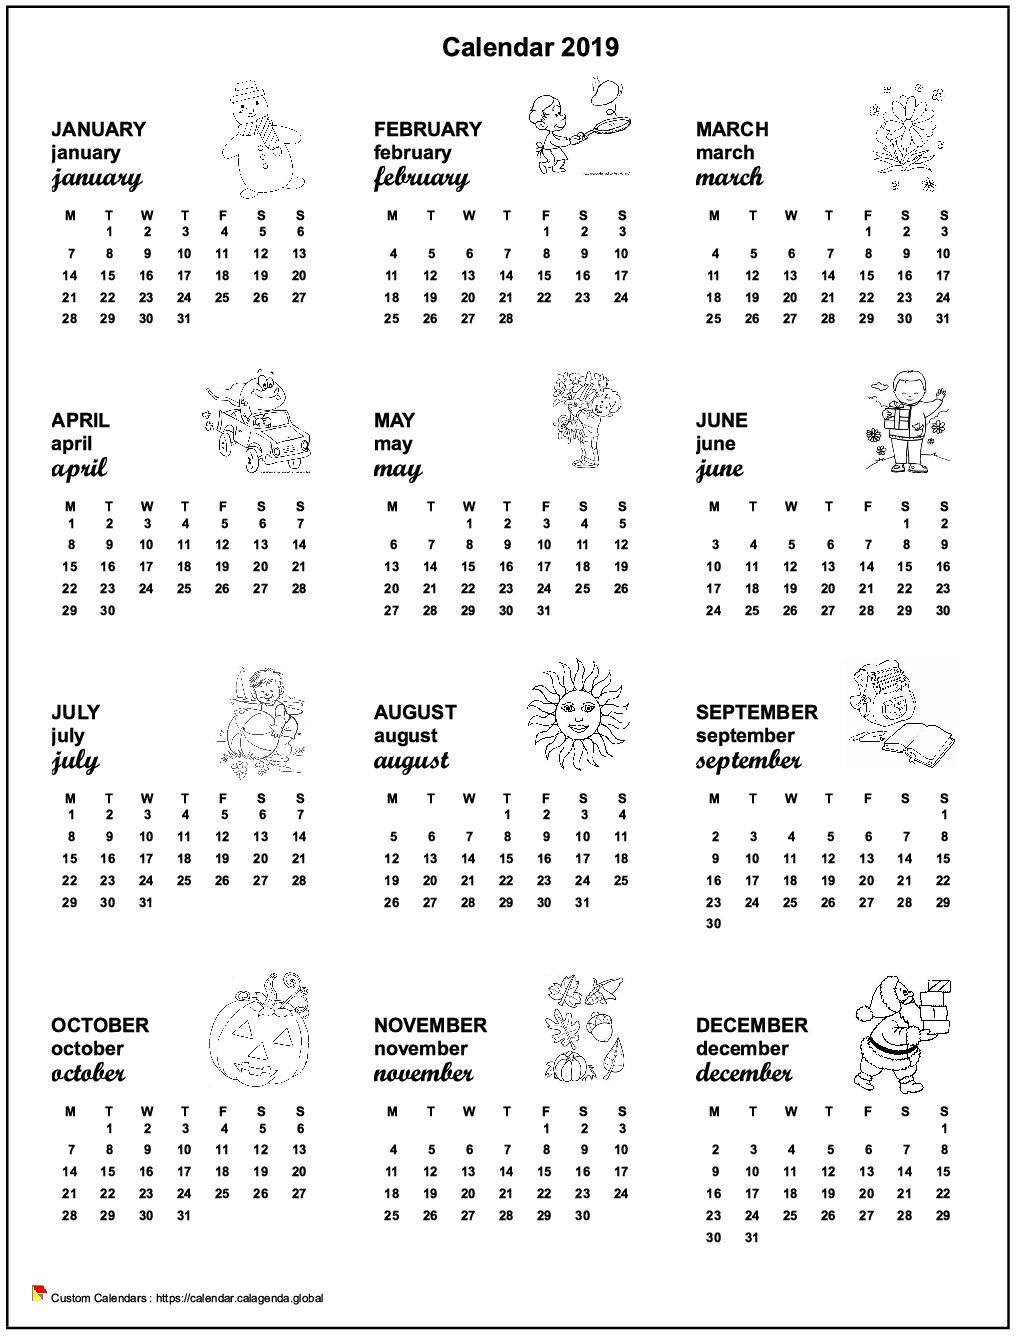 Calendar 2059 annual maternal and primary school